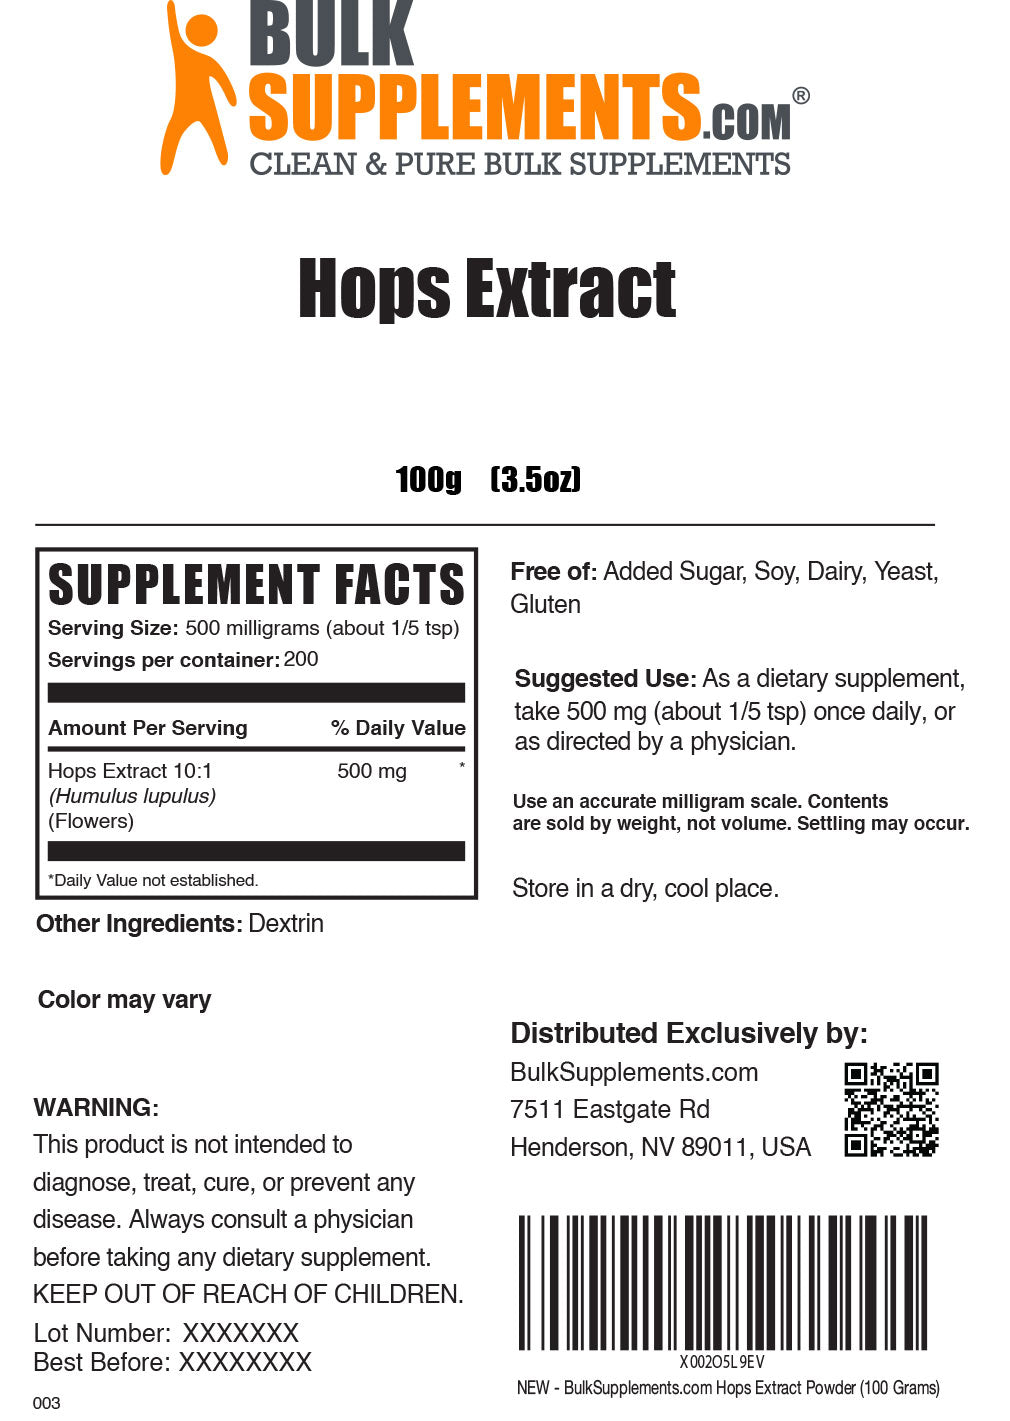 Hops Extract Supplement Facts